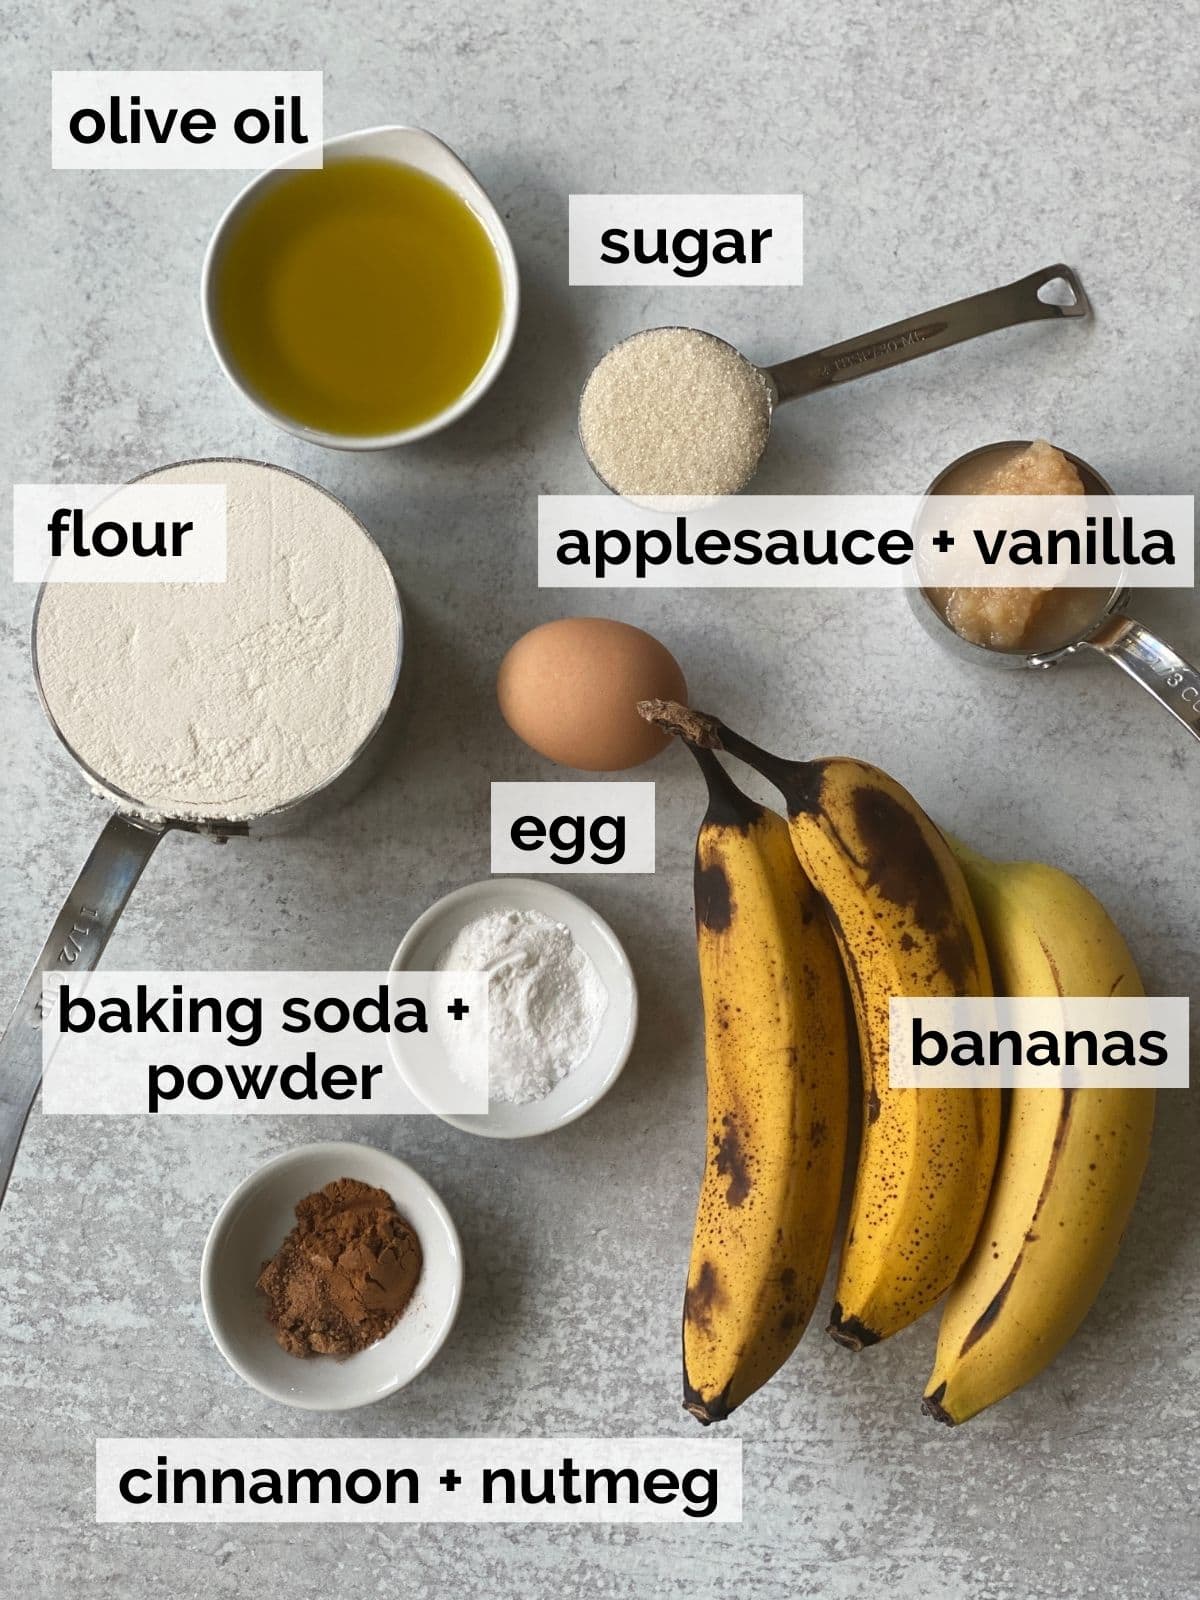 Ingredients for banana apple muffins.